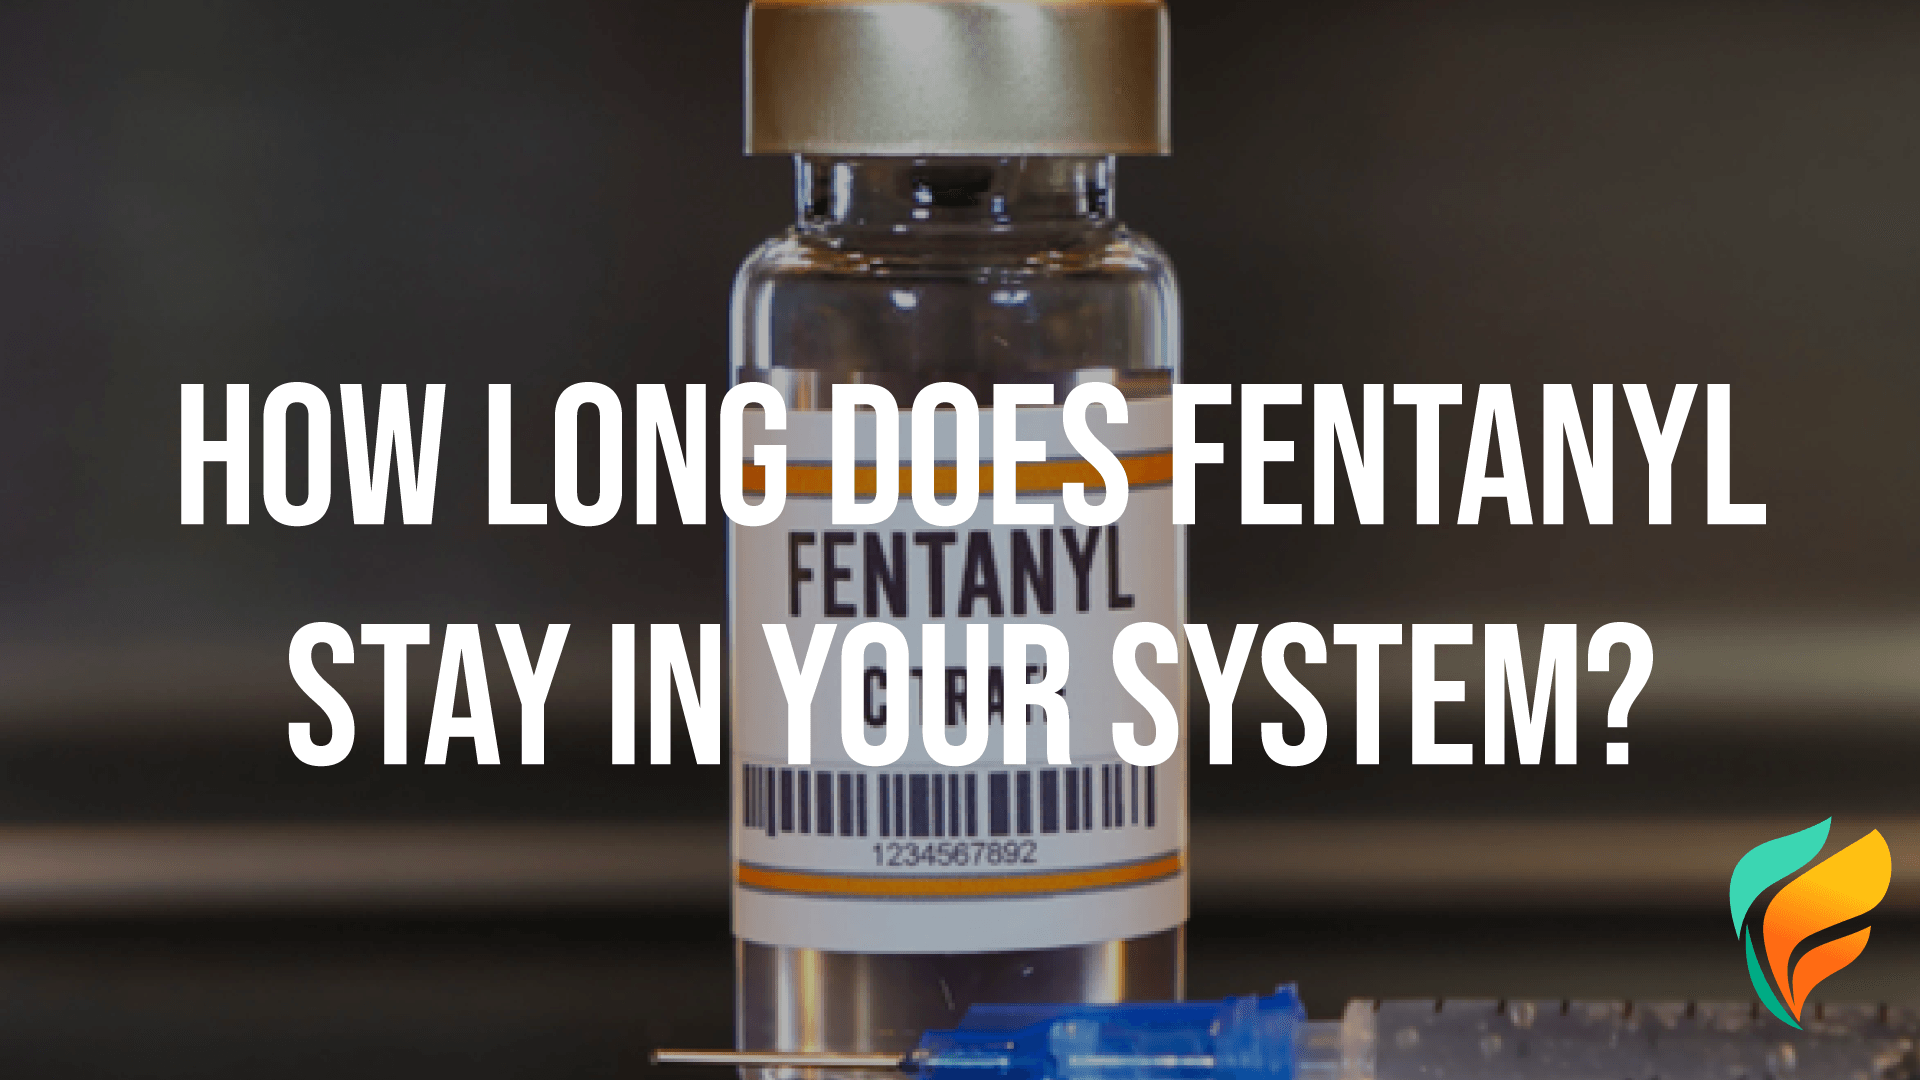 Fentanyl: How Long Does Fentanyl Stay In Your System?